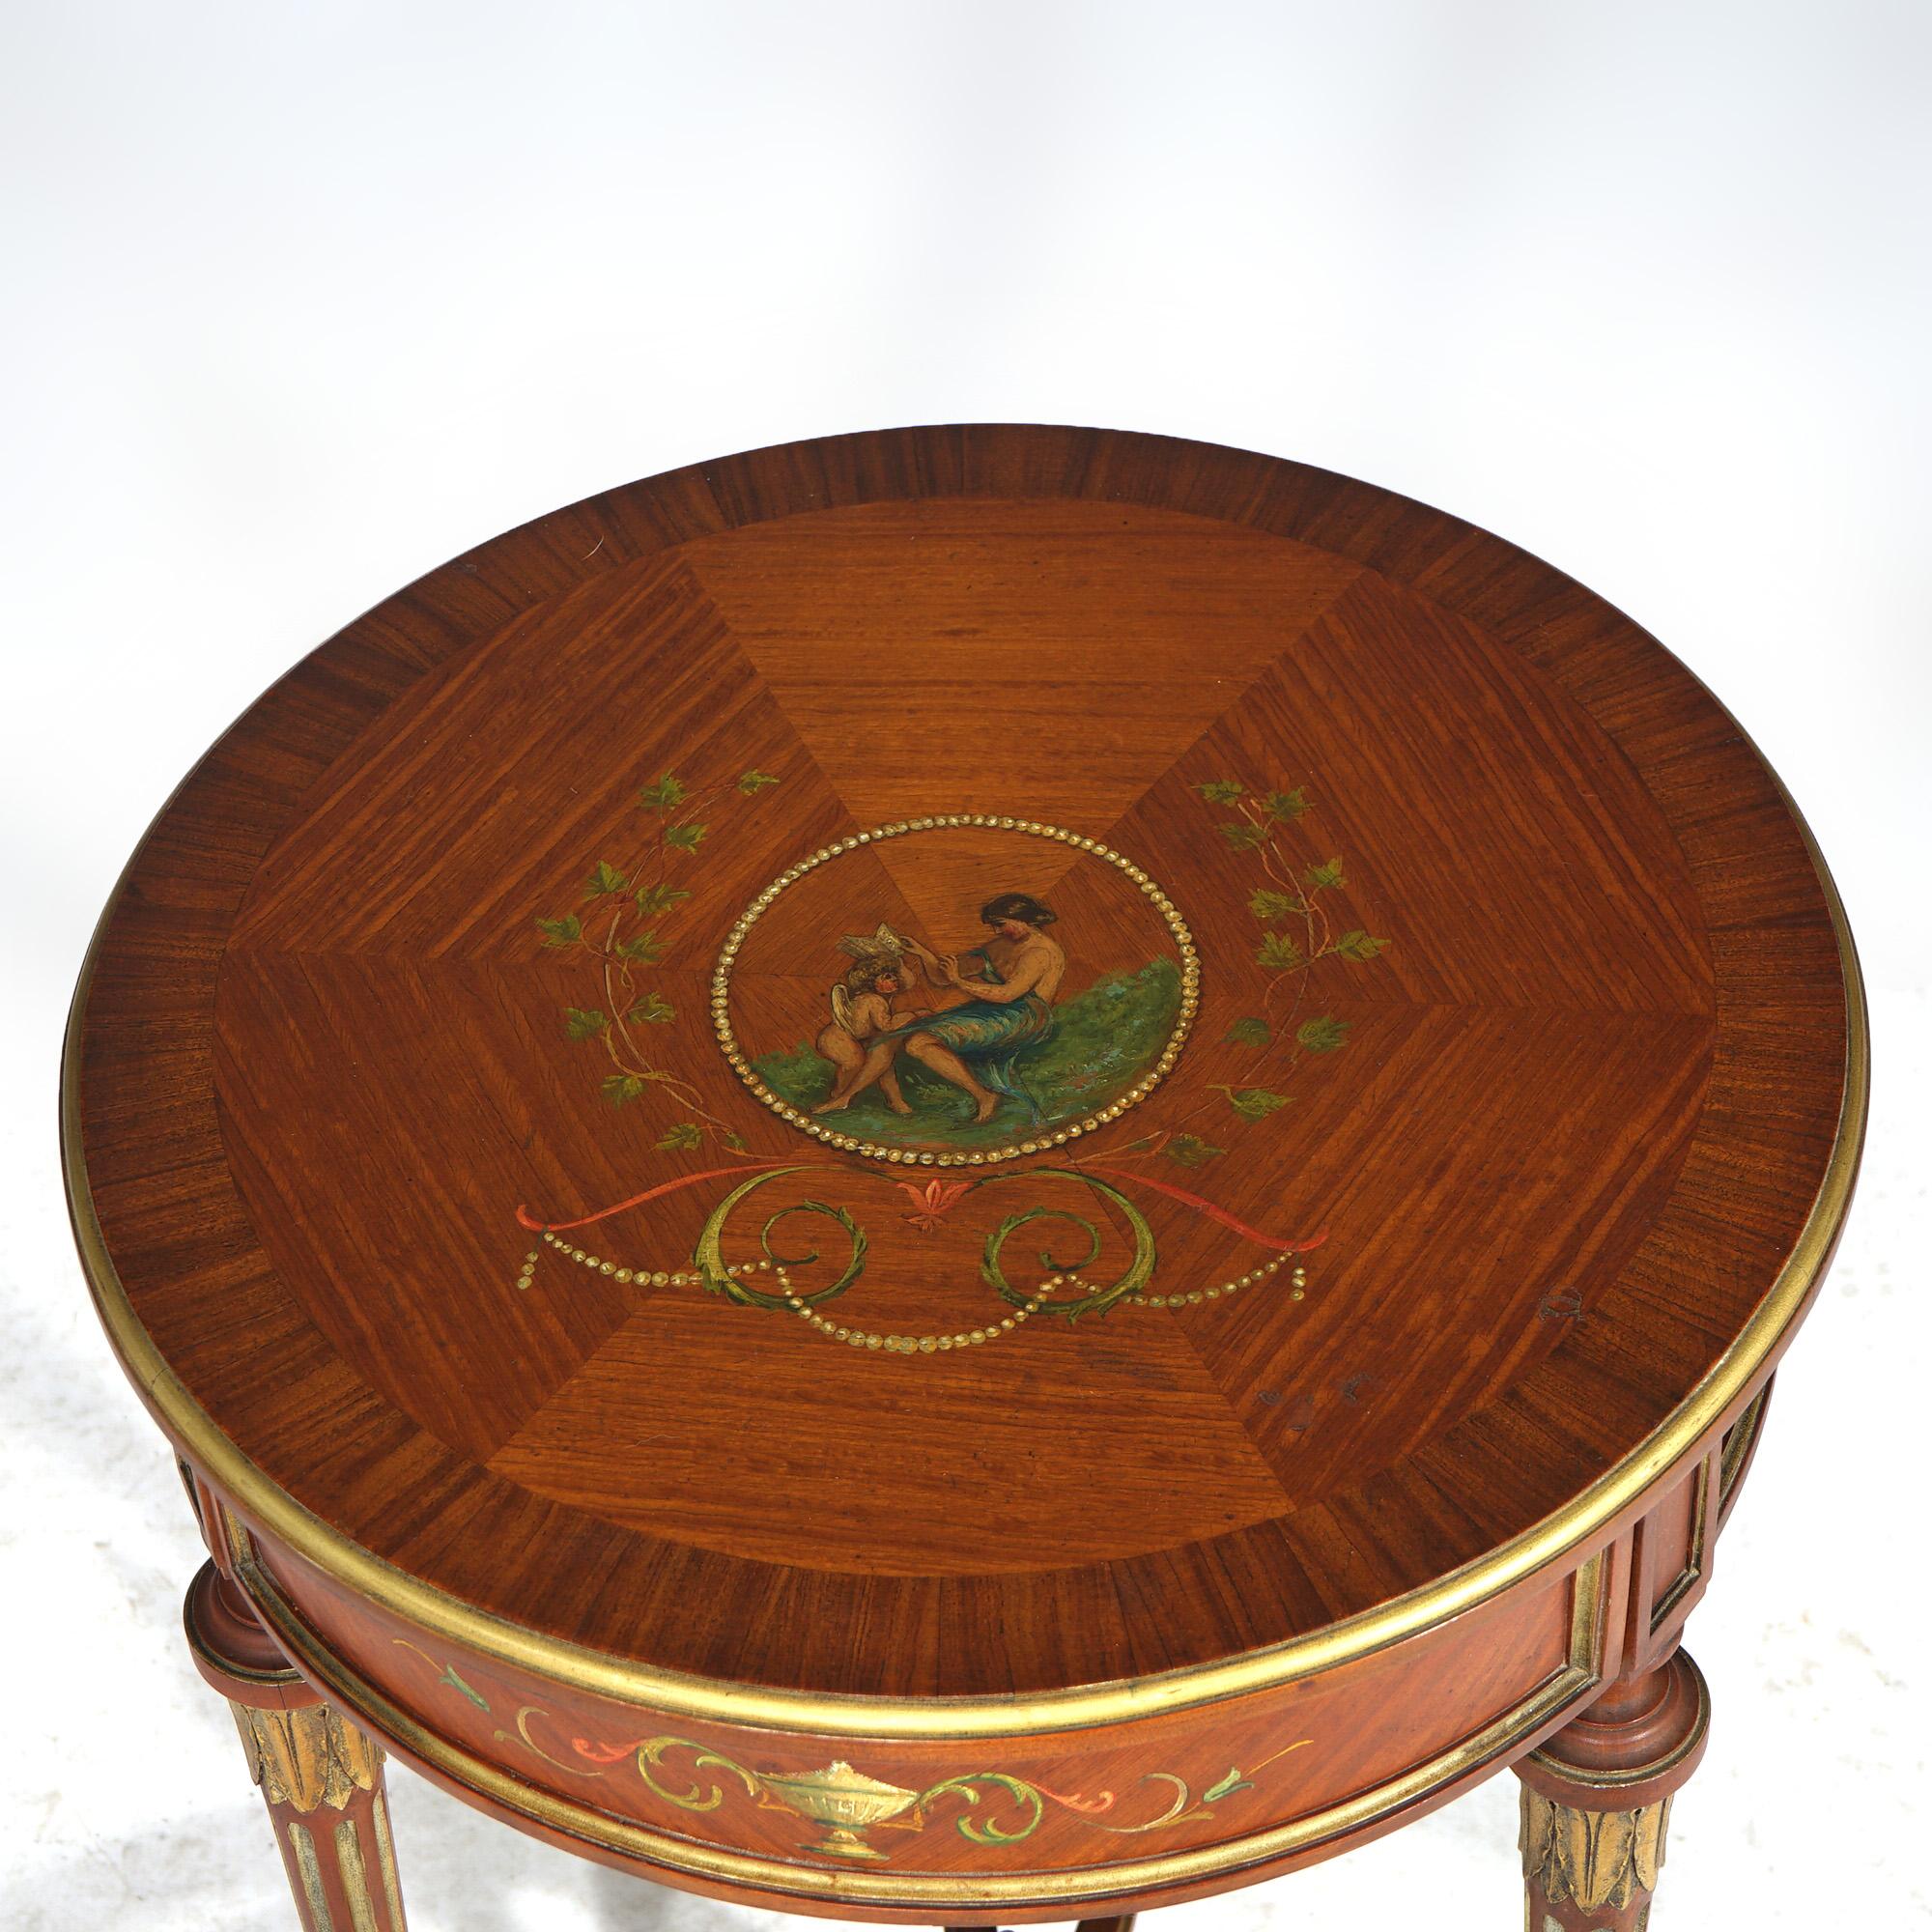 ***Ask About Lower In-House Shipping Rates - Reliable Service, Competitive Rates & Fully Insured***

An antique English side stand set offers satinwood construction with demilune center stand having double door opening to lower cabinet and two